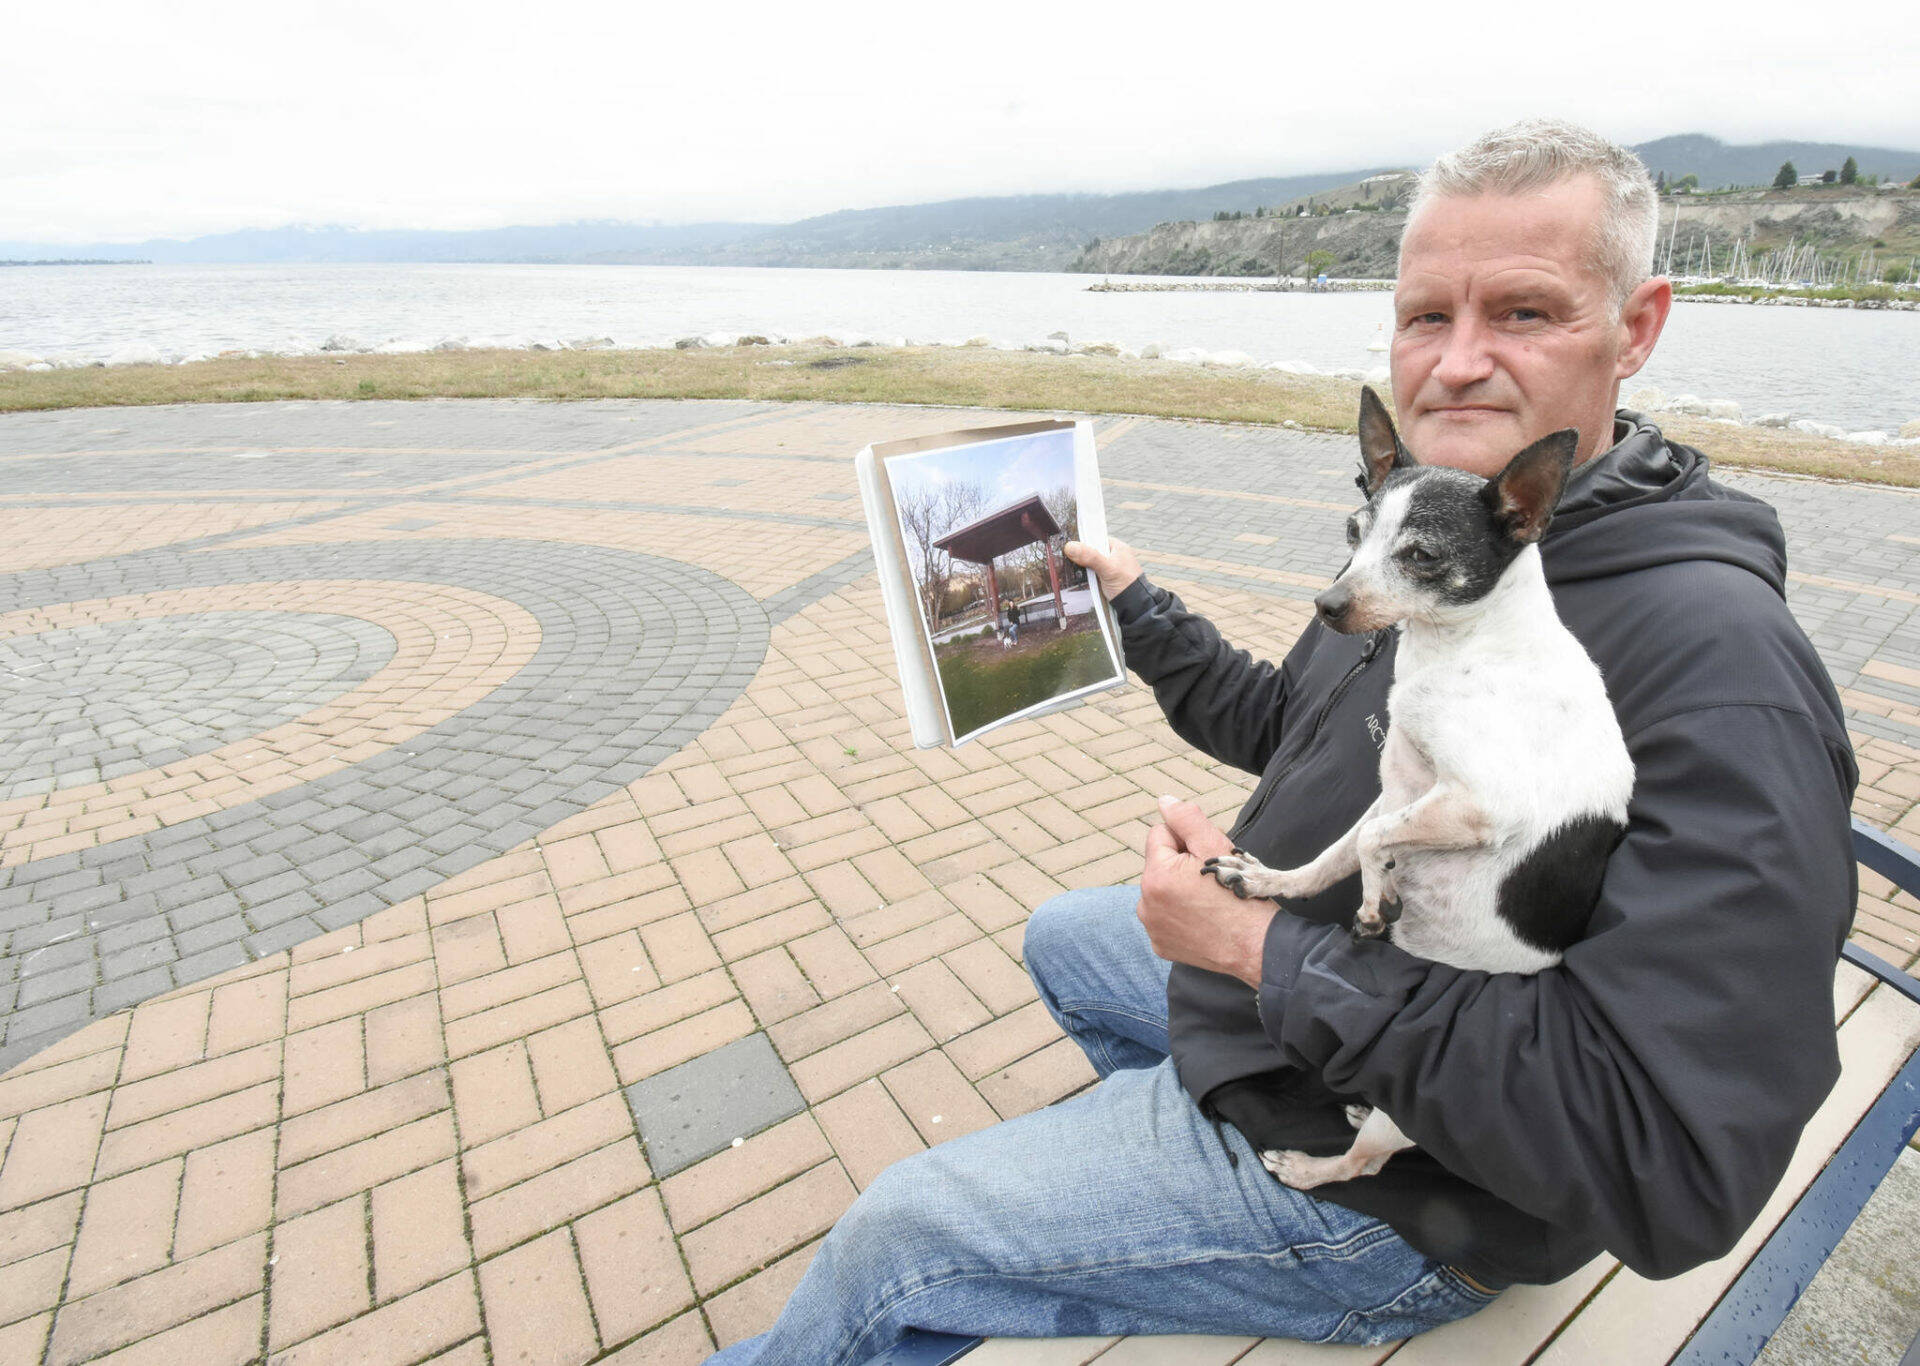 Gord Portman and his dog Zippy sit at Marina Way Park while holding a picture of a bench he would like to have installed in memory of those who have lost their lives to an overdose. (Mark Brett photo)